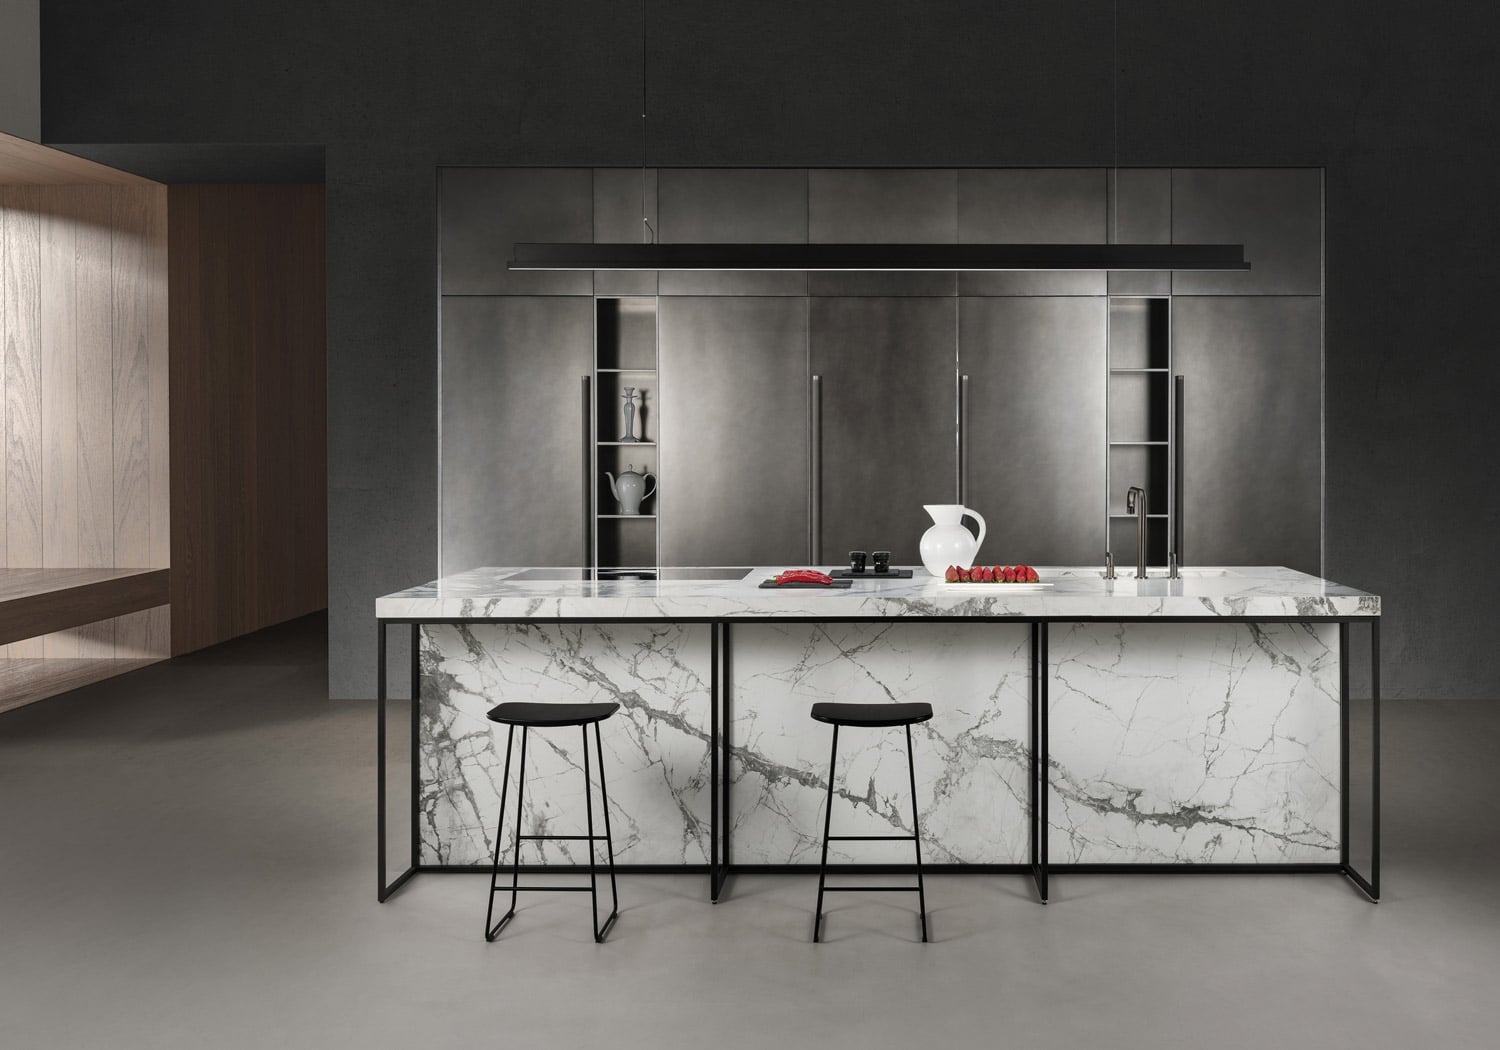 The stone and metal finishes balance each other with contemporary allure. The design is essential, yet detailed. The black metal frame used on the island further enhances the character of this custom kitchen.